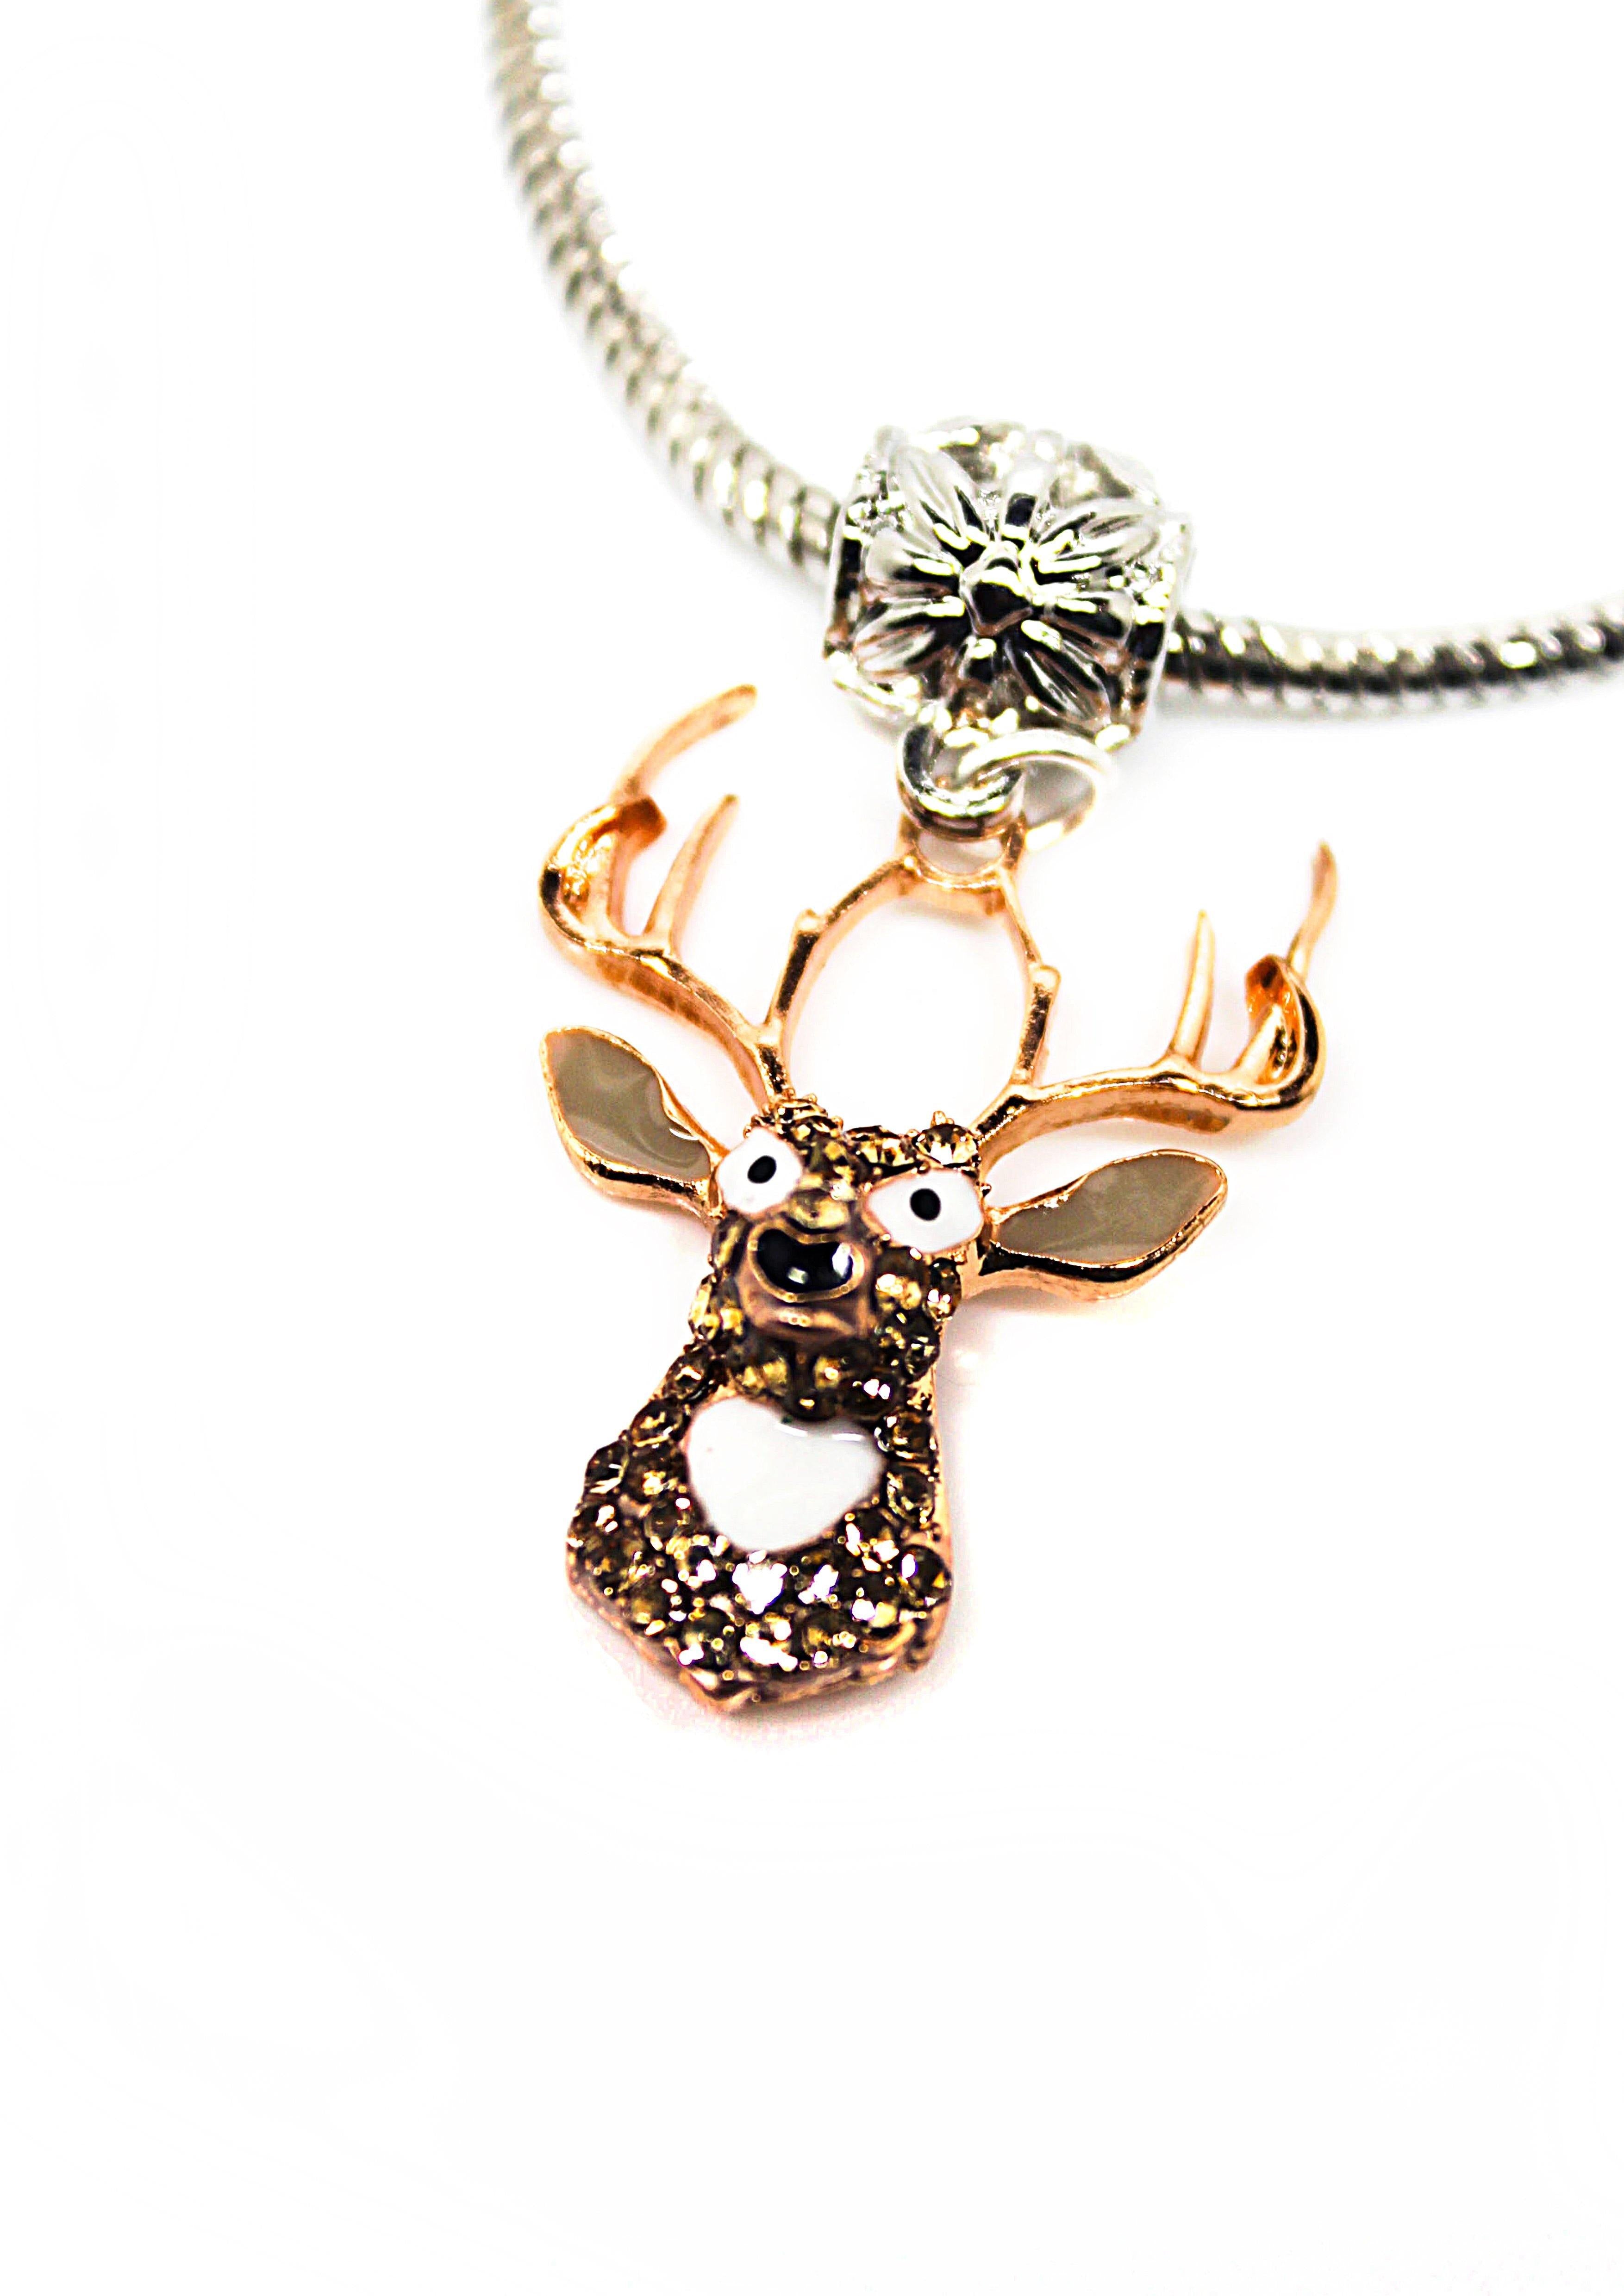 Stag Charm Bracelet - Wildtouch - Wildtouch